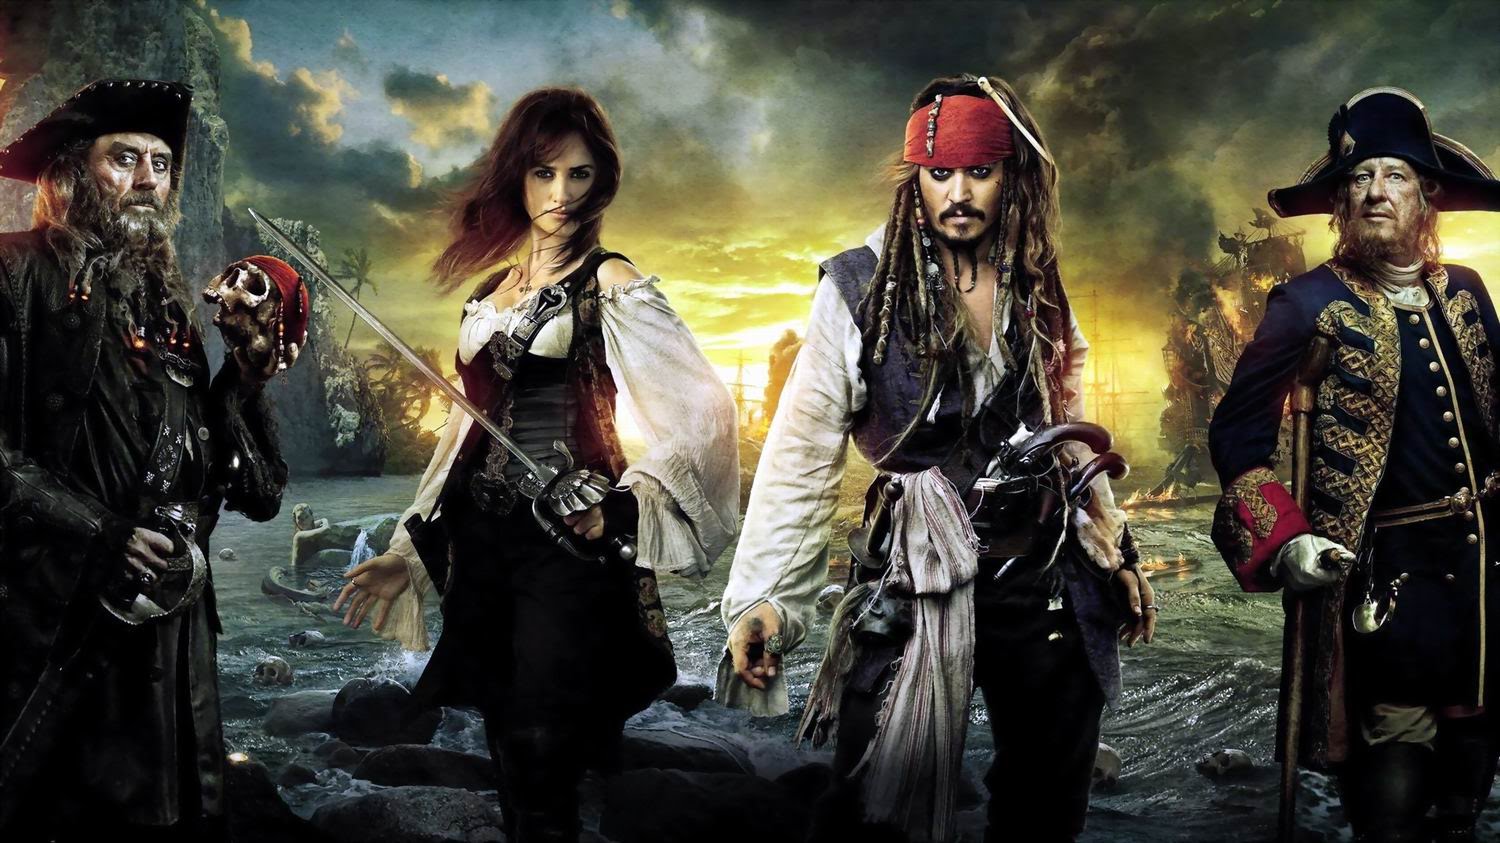 Pirates Of The Caribbean On Stranger Tides wallpapers, Movie, HQ